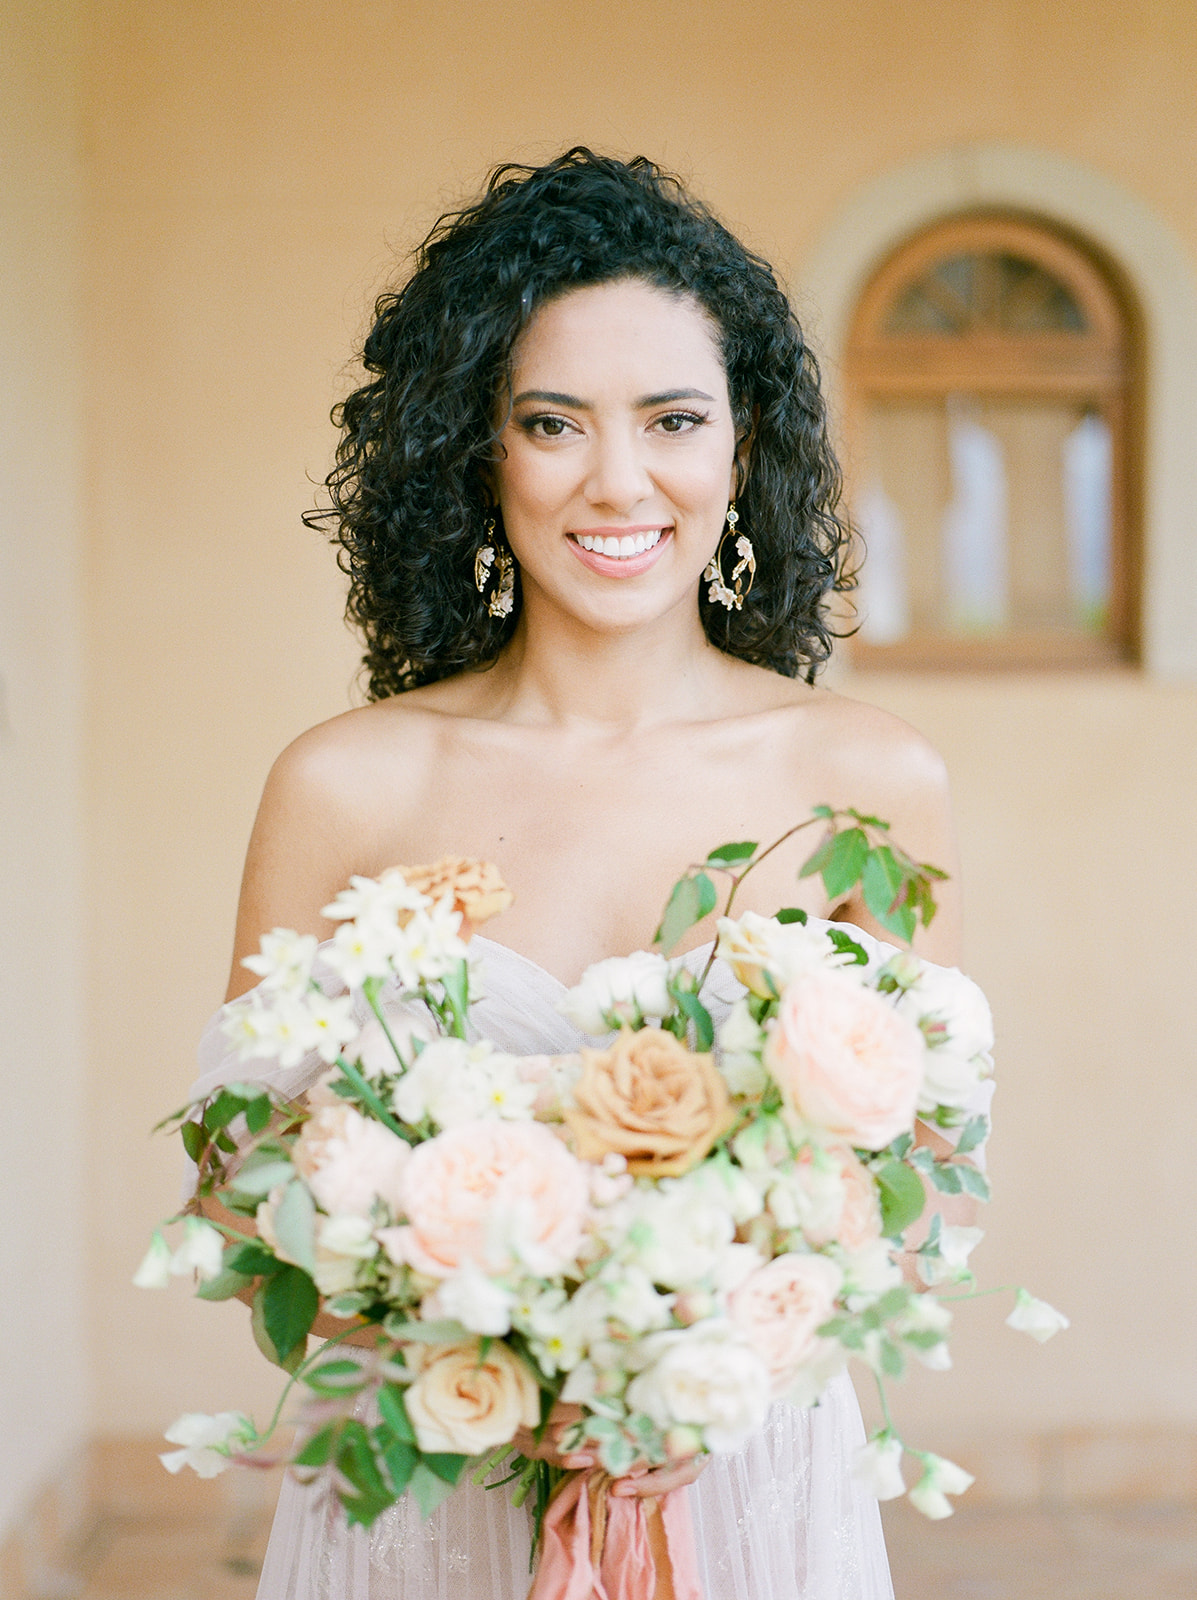 Image of bride shot using a film camera to demonstrate hybrid wedding photography.